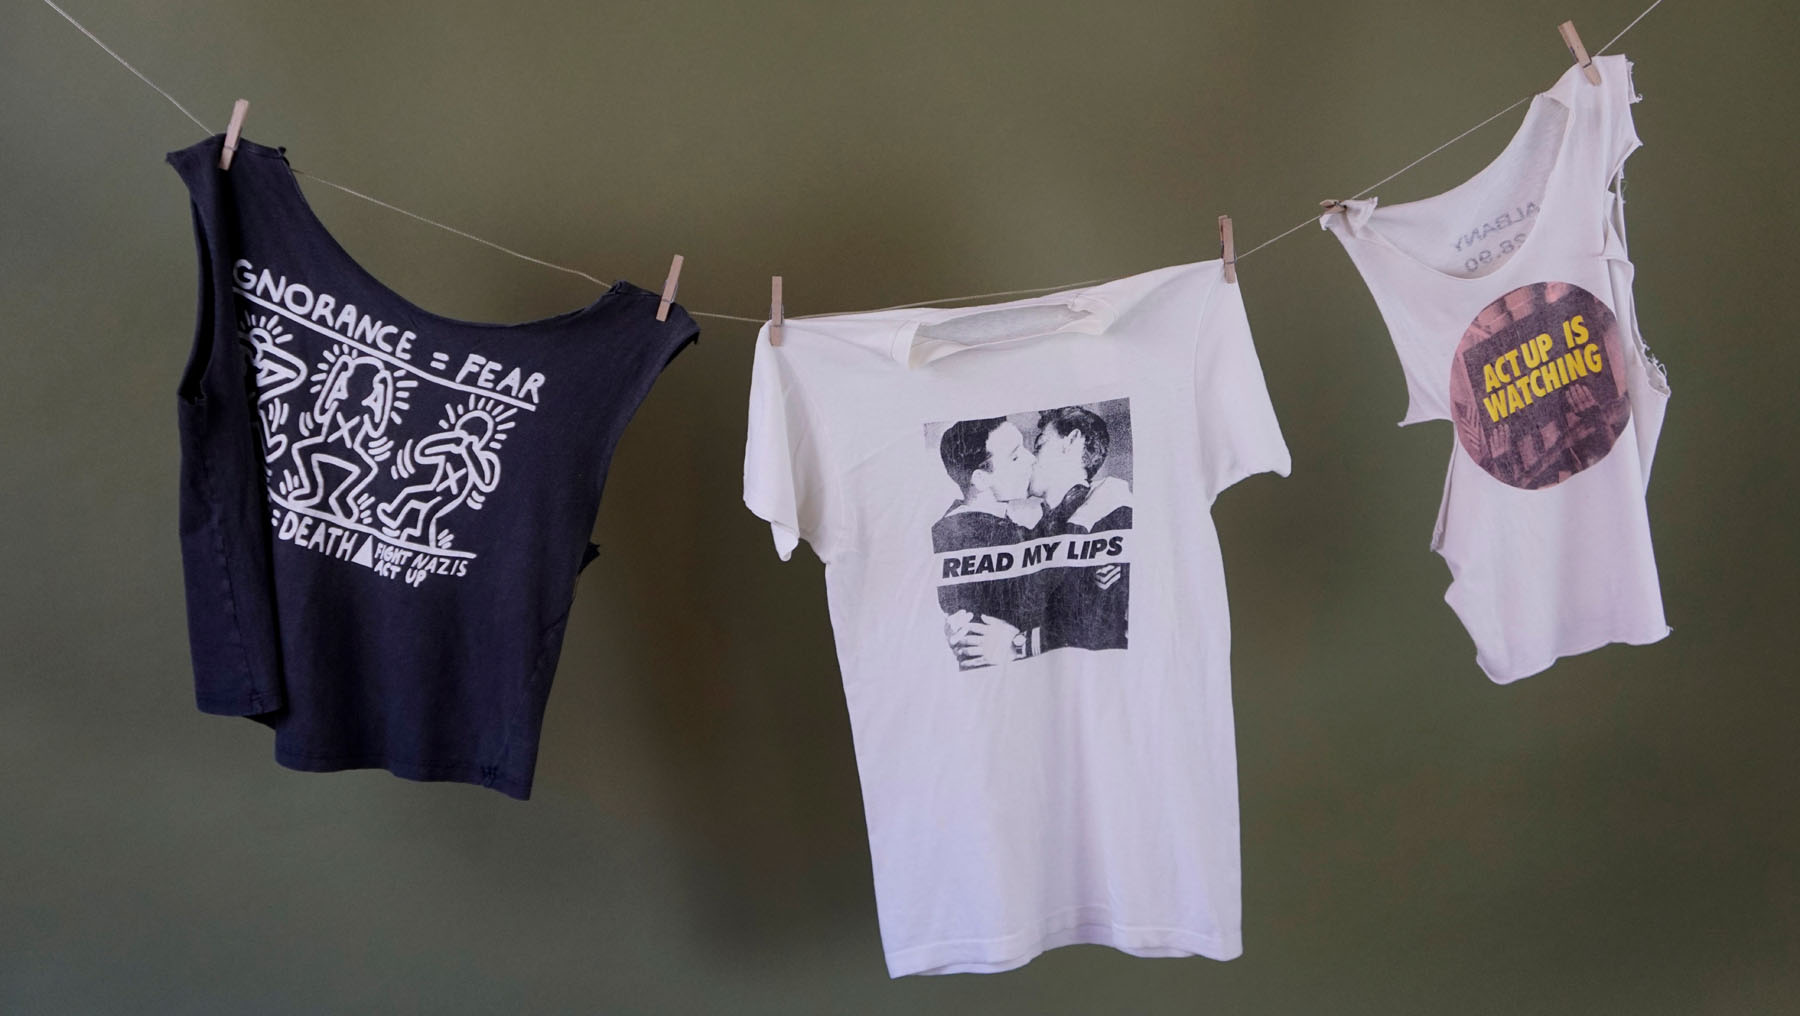 WePresent | The history of AIDS activism told through T-shirts.